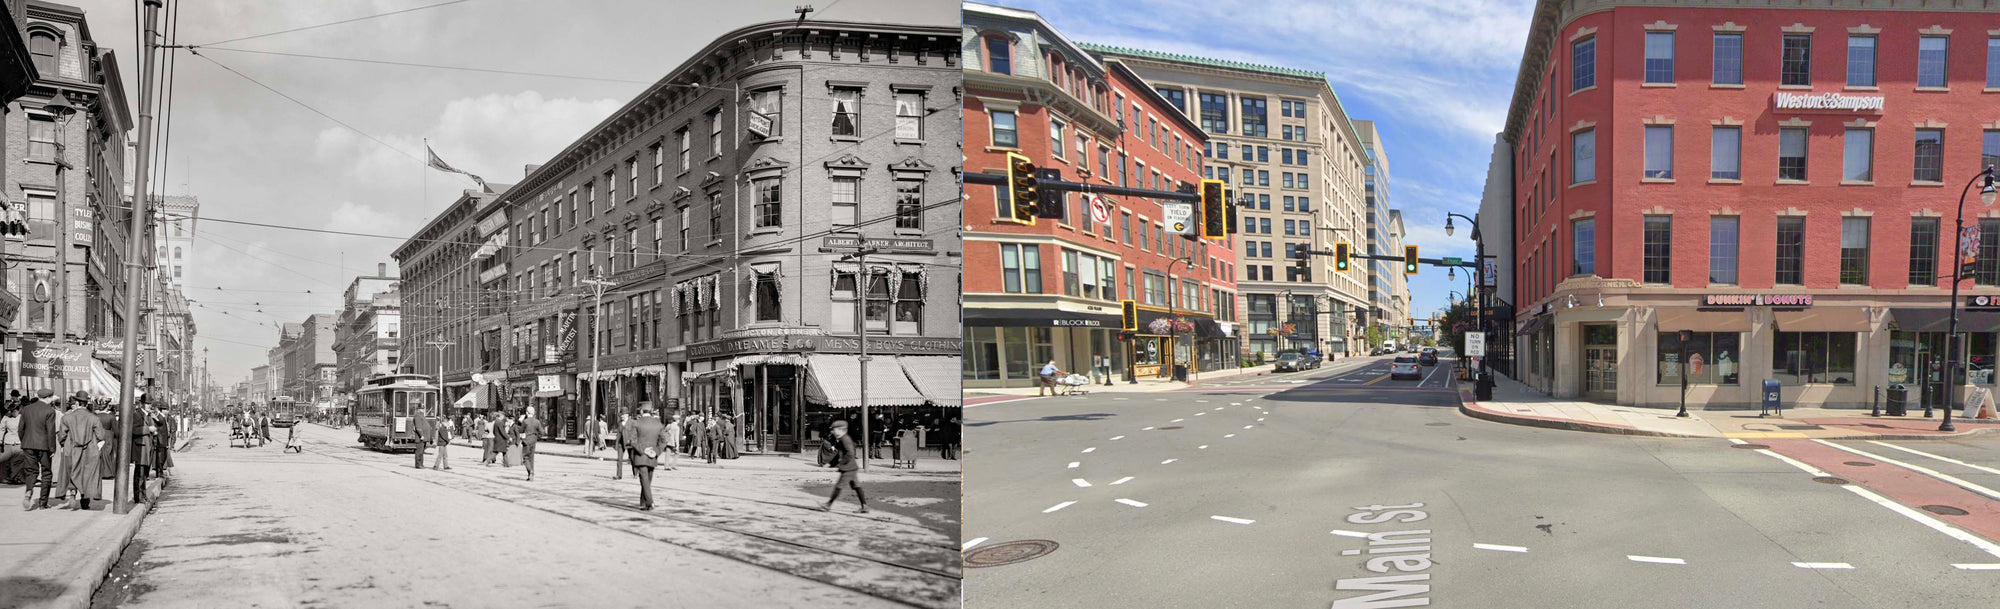 Worcester, MA, Main Street, Then and Now